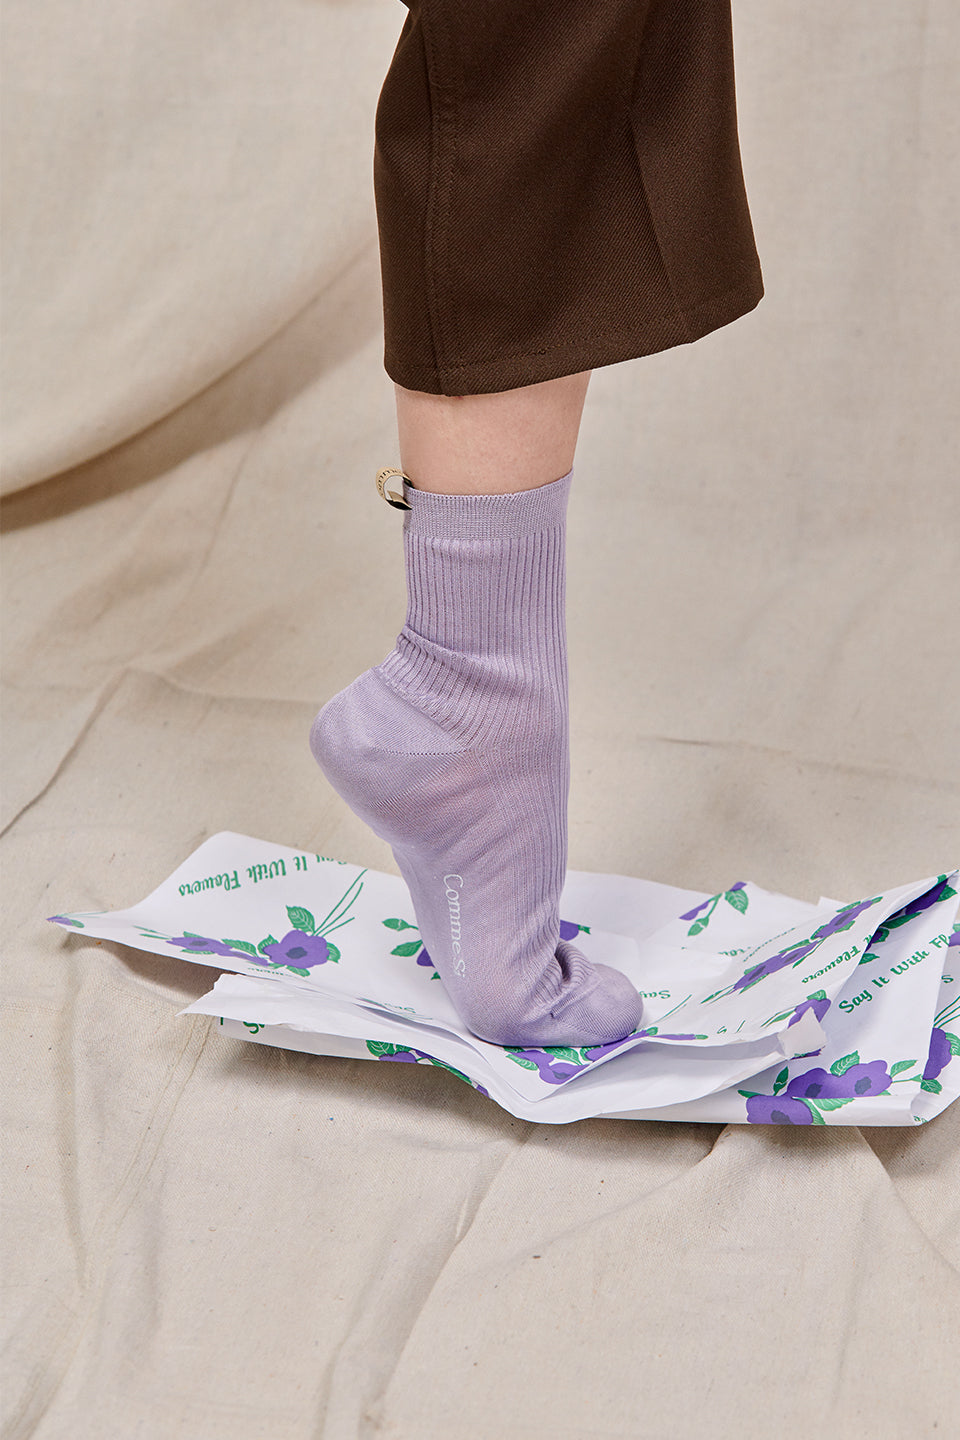 The Agnelli sock in Lilac light purple, foot stepping on a piece of floral bouquet wrapping paper, wearing brown trousers